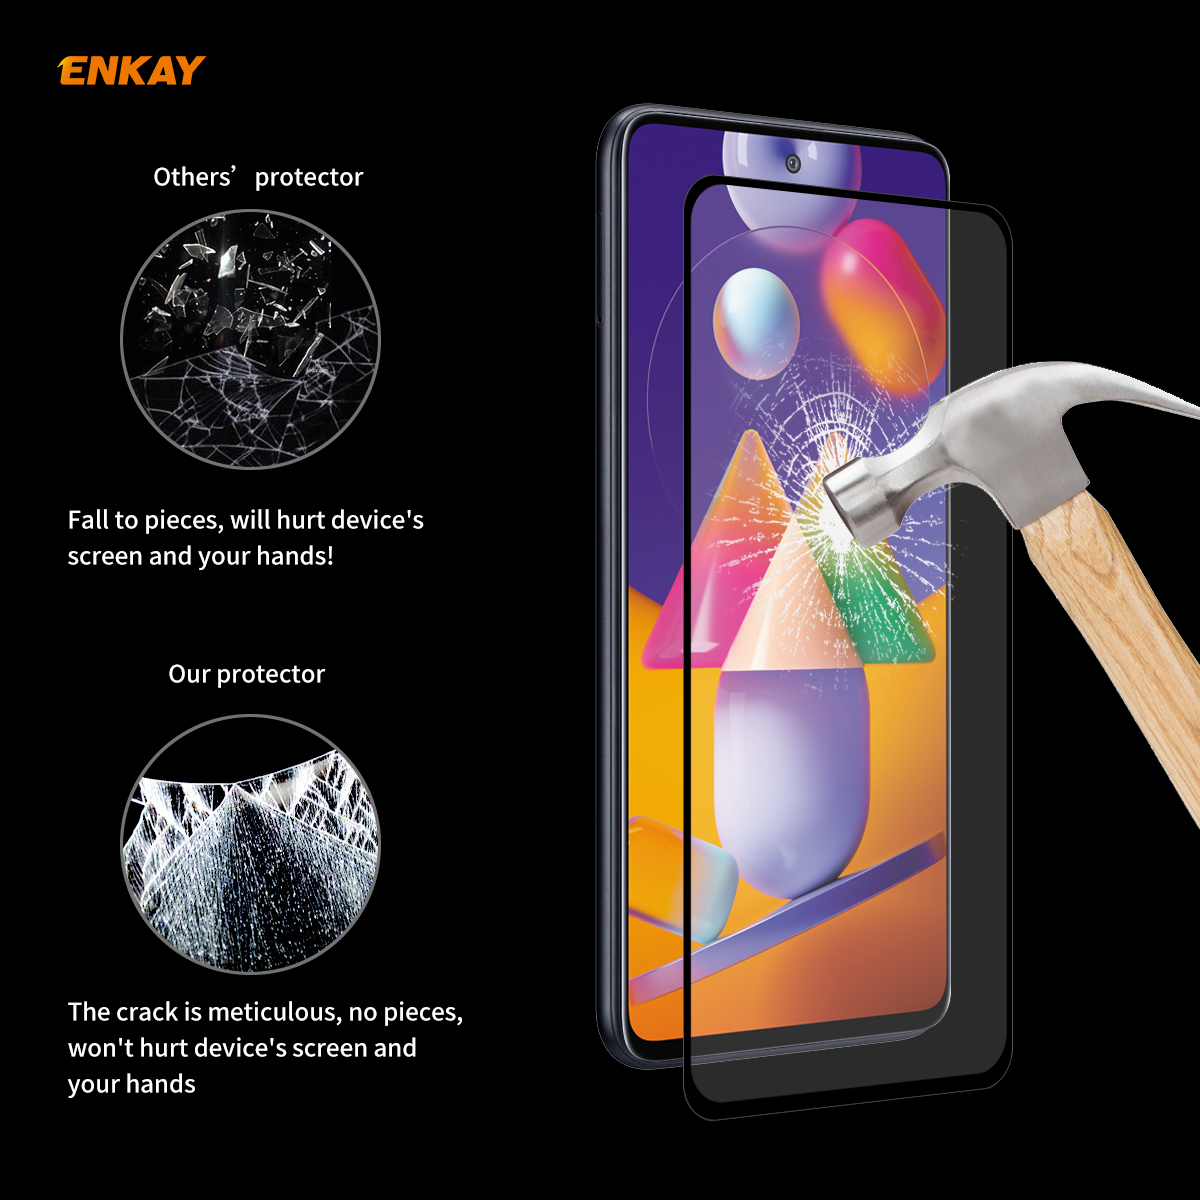 ENKAY-12510-Pcs-9H-Crystal-Clear-Anti-Explosion-Anti-Scratch-Full-Glue-Full-Coverage-Tempered-Glass--1730138-5